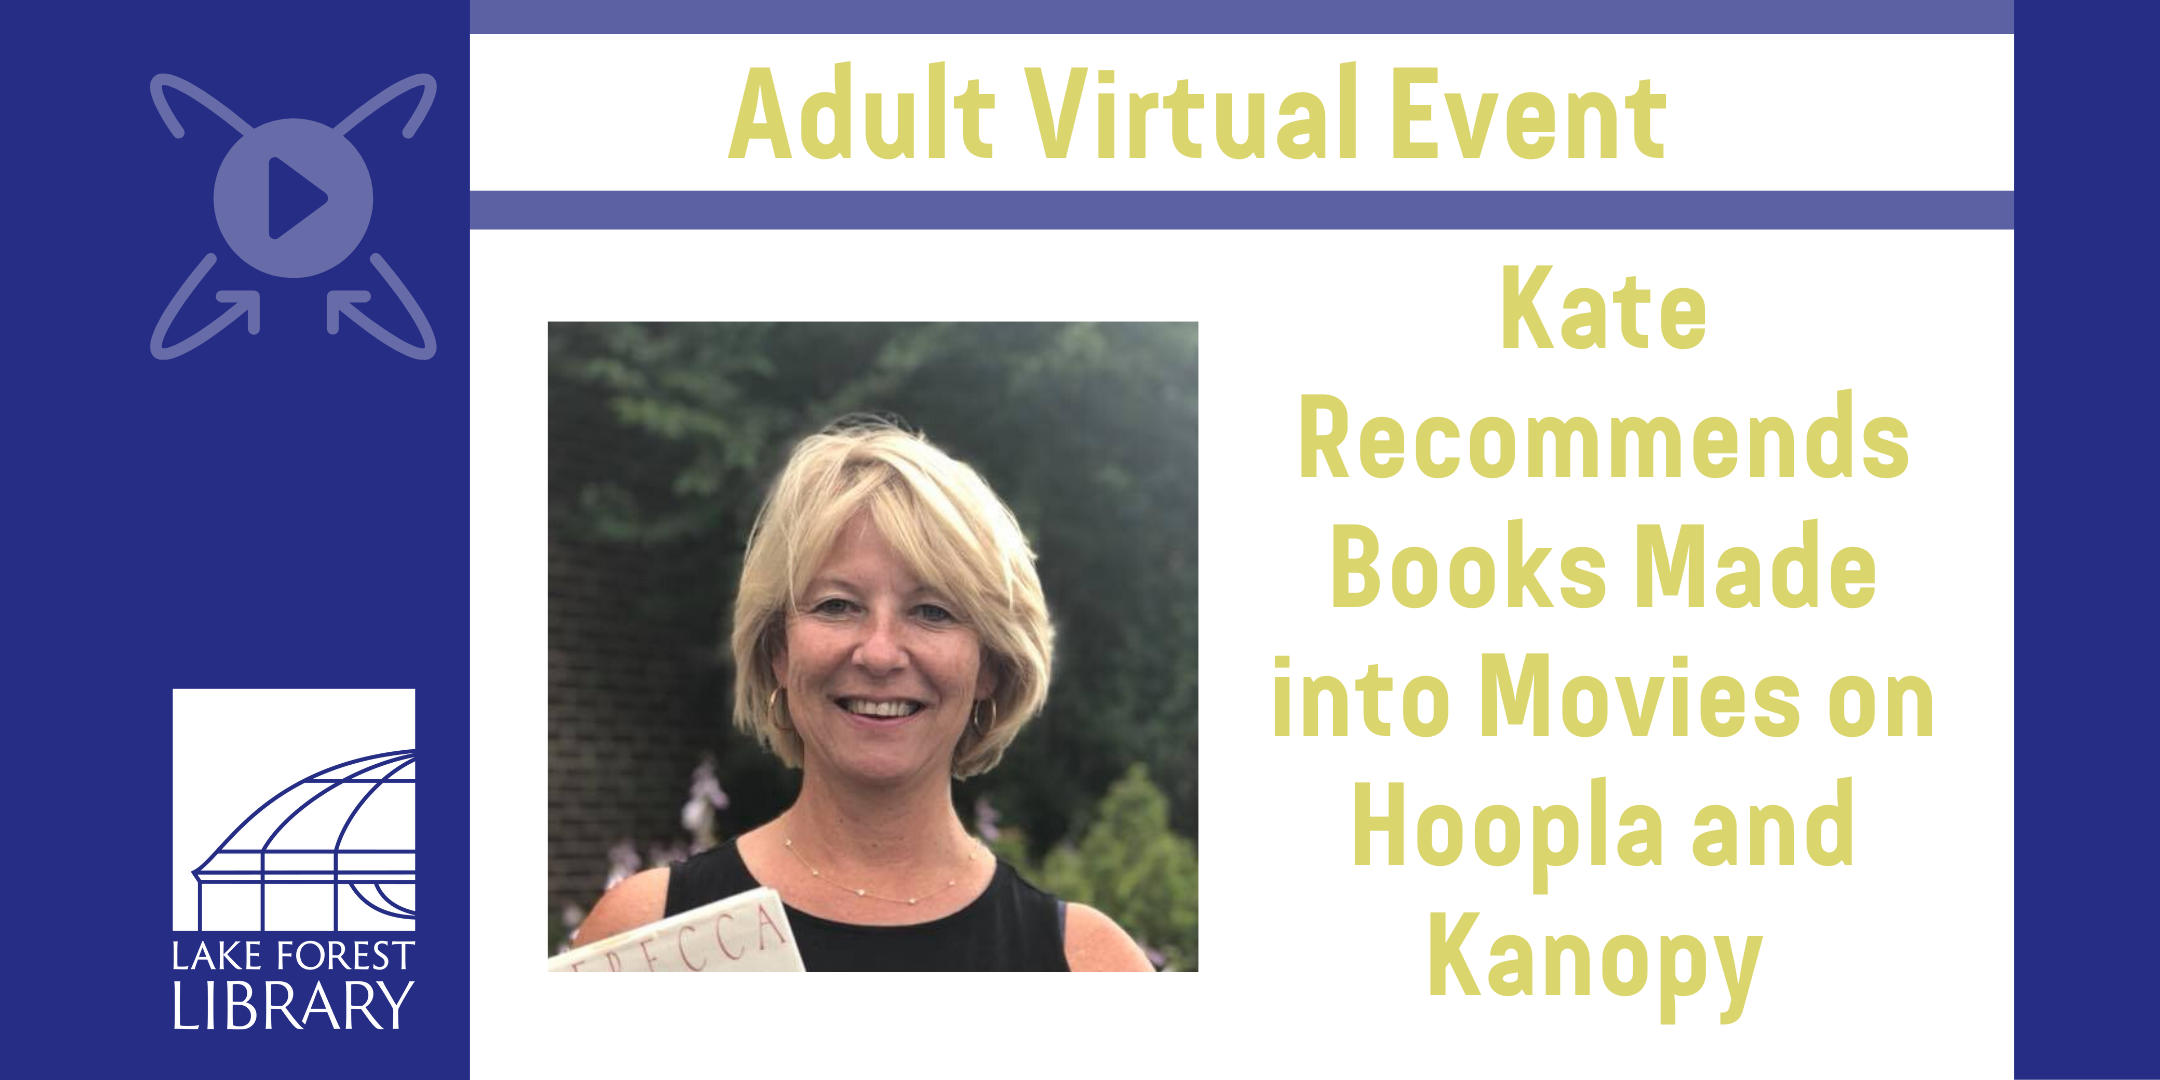 Kate Recommends Books Made Into Movies on Hoopla and Kanopy